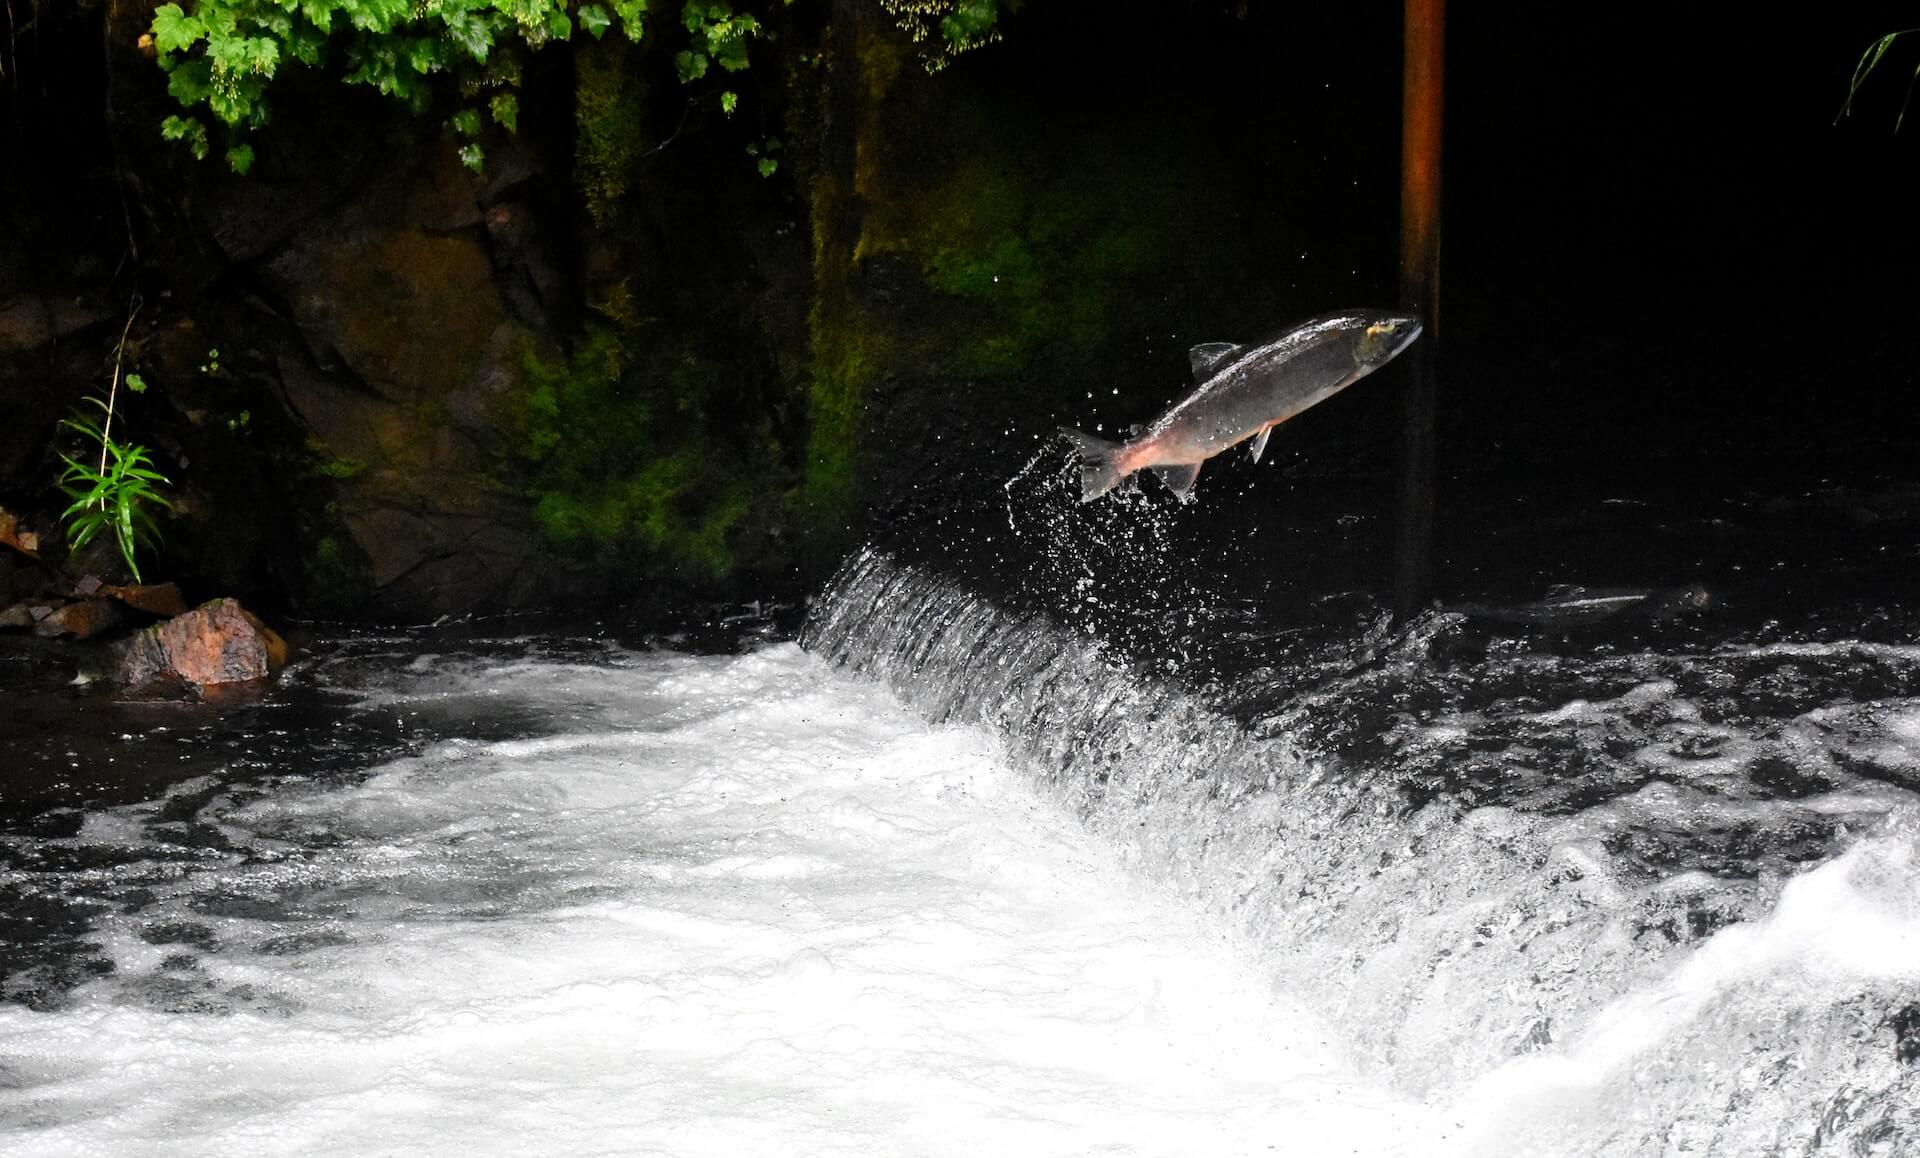 Fish jumping out of water 